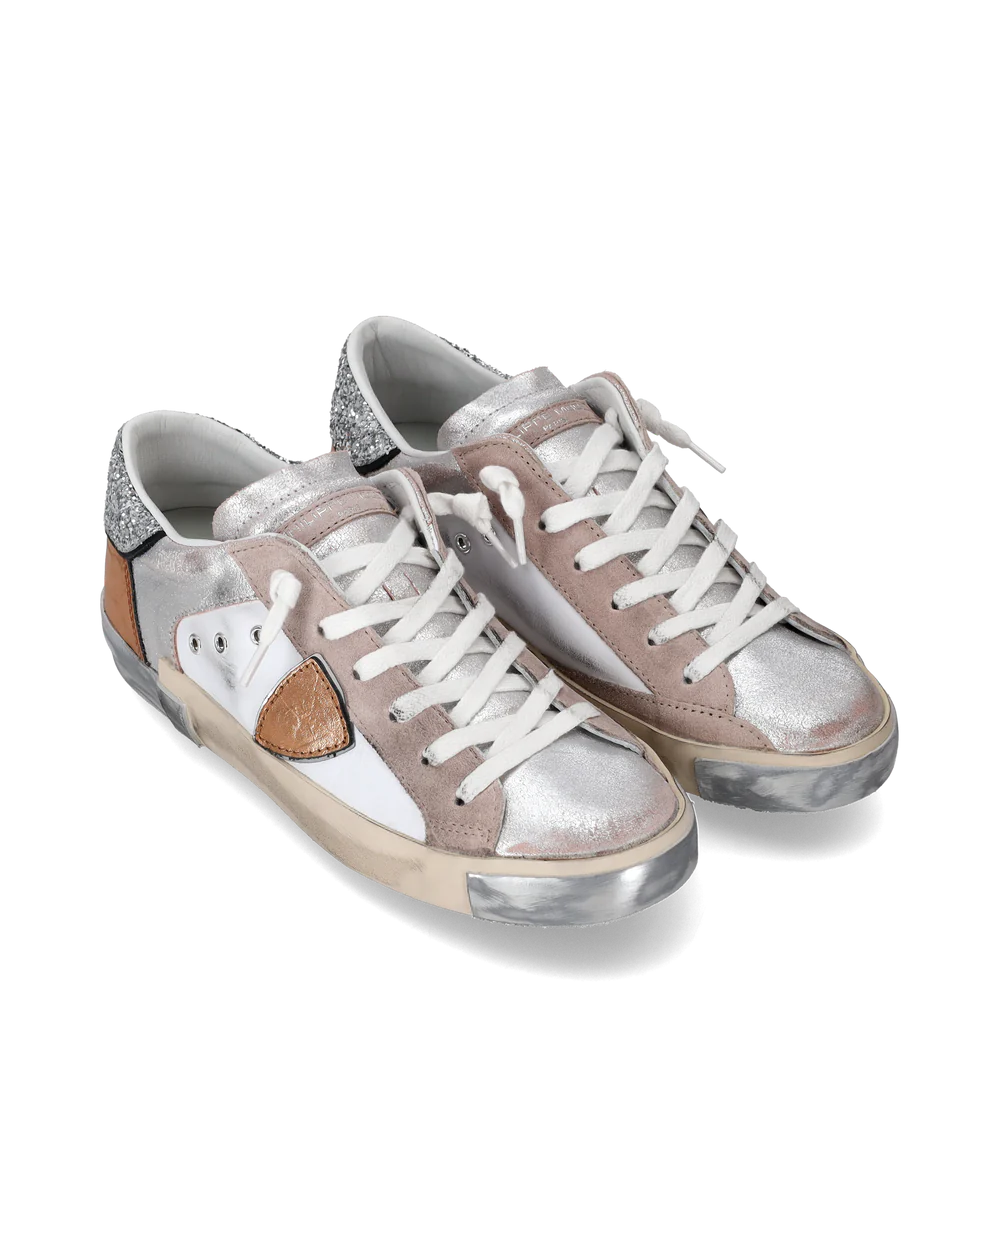 Women’s Prsx Low-Top Sneakers in Leather - White Pink